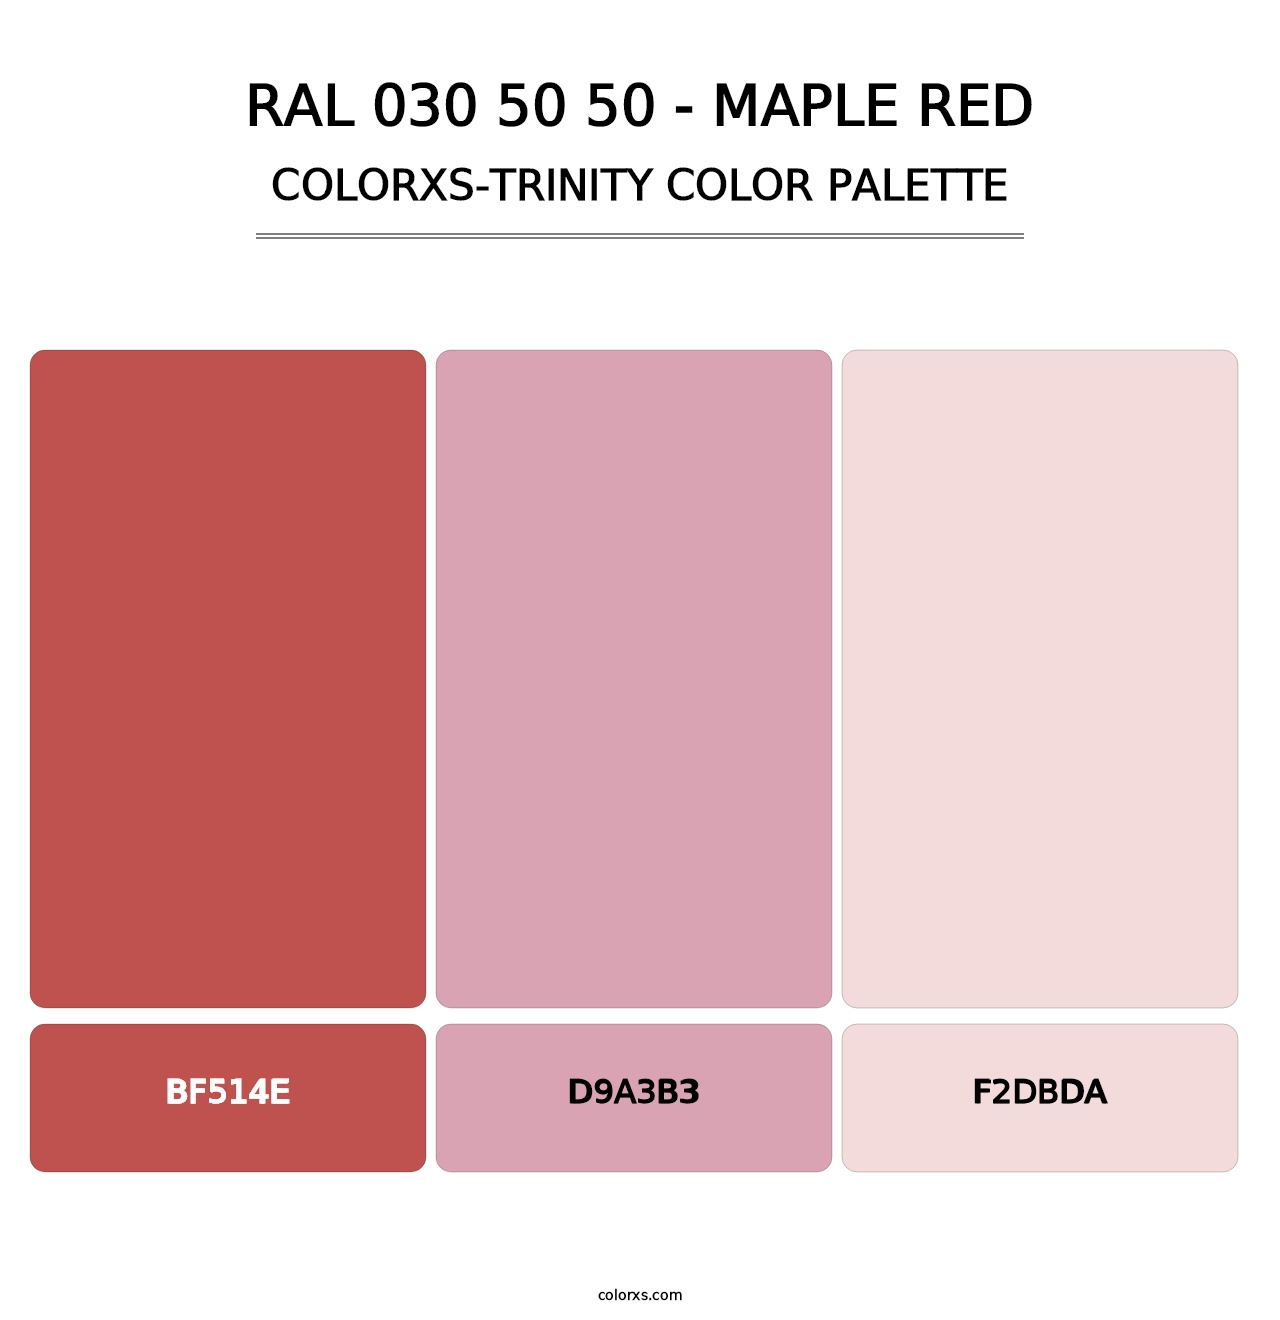 RAL 030 50 50 - Maple Red - Colorxs Trinity Palette